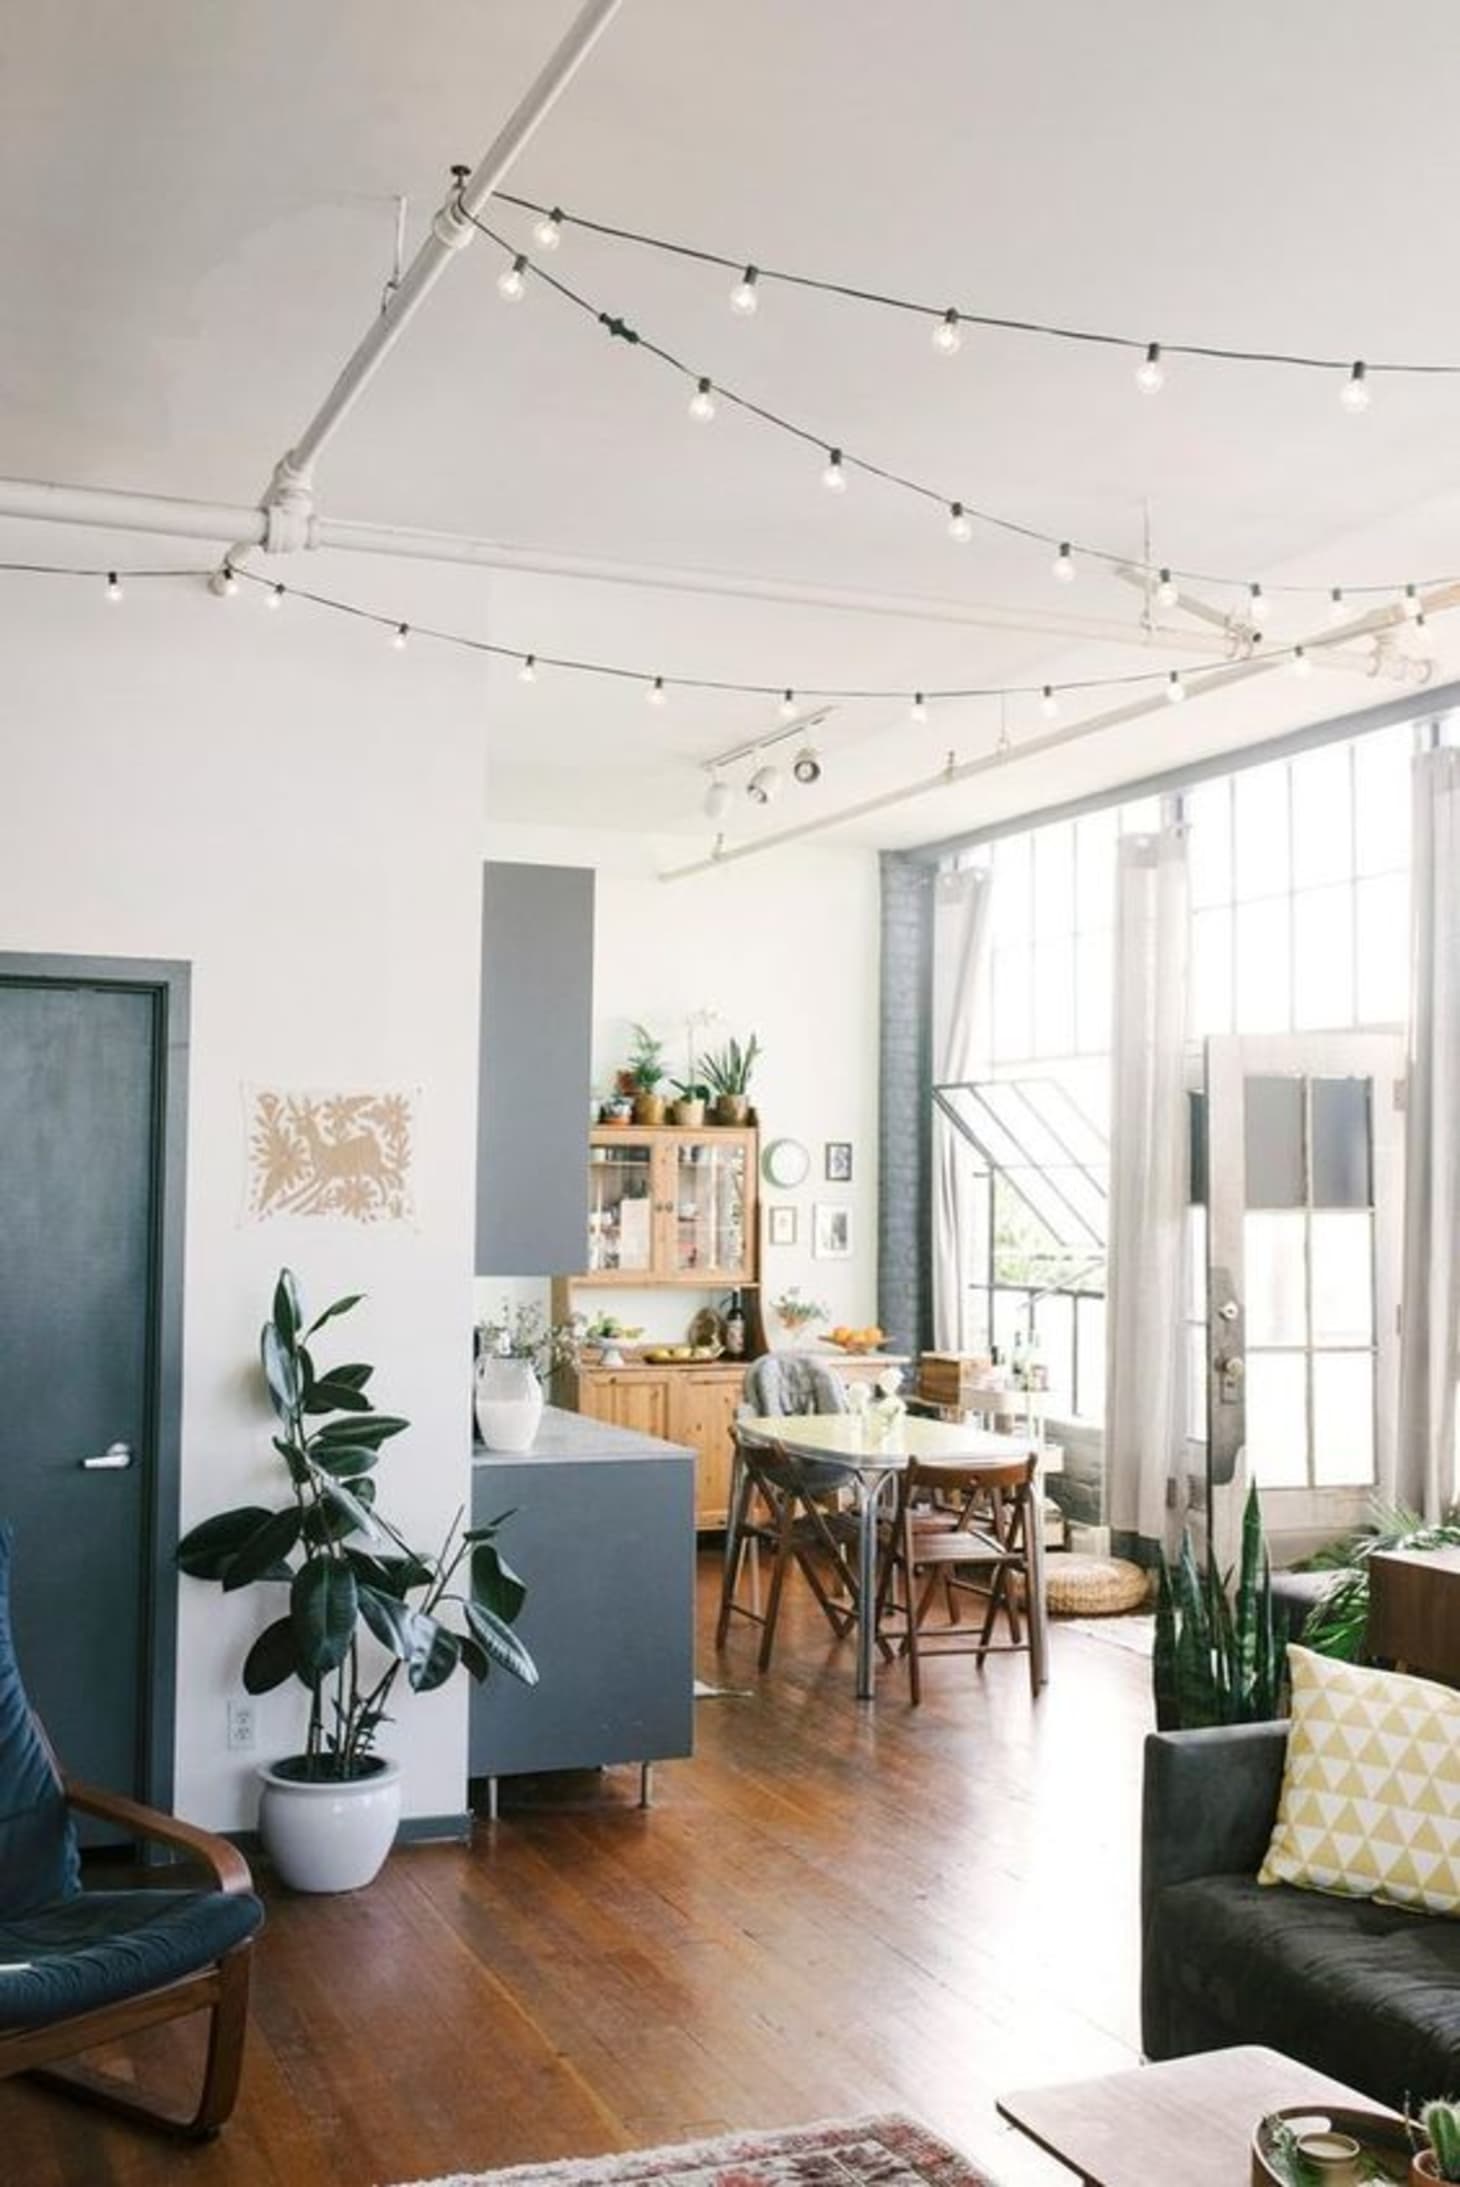 28 Ways To Use Those Magical String Lights Apartment Therapy